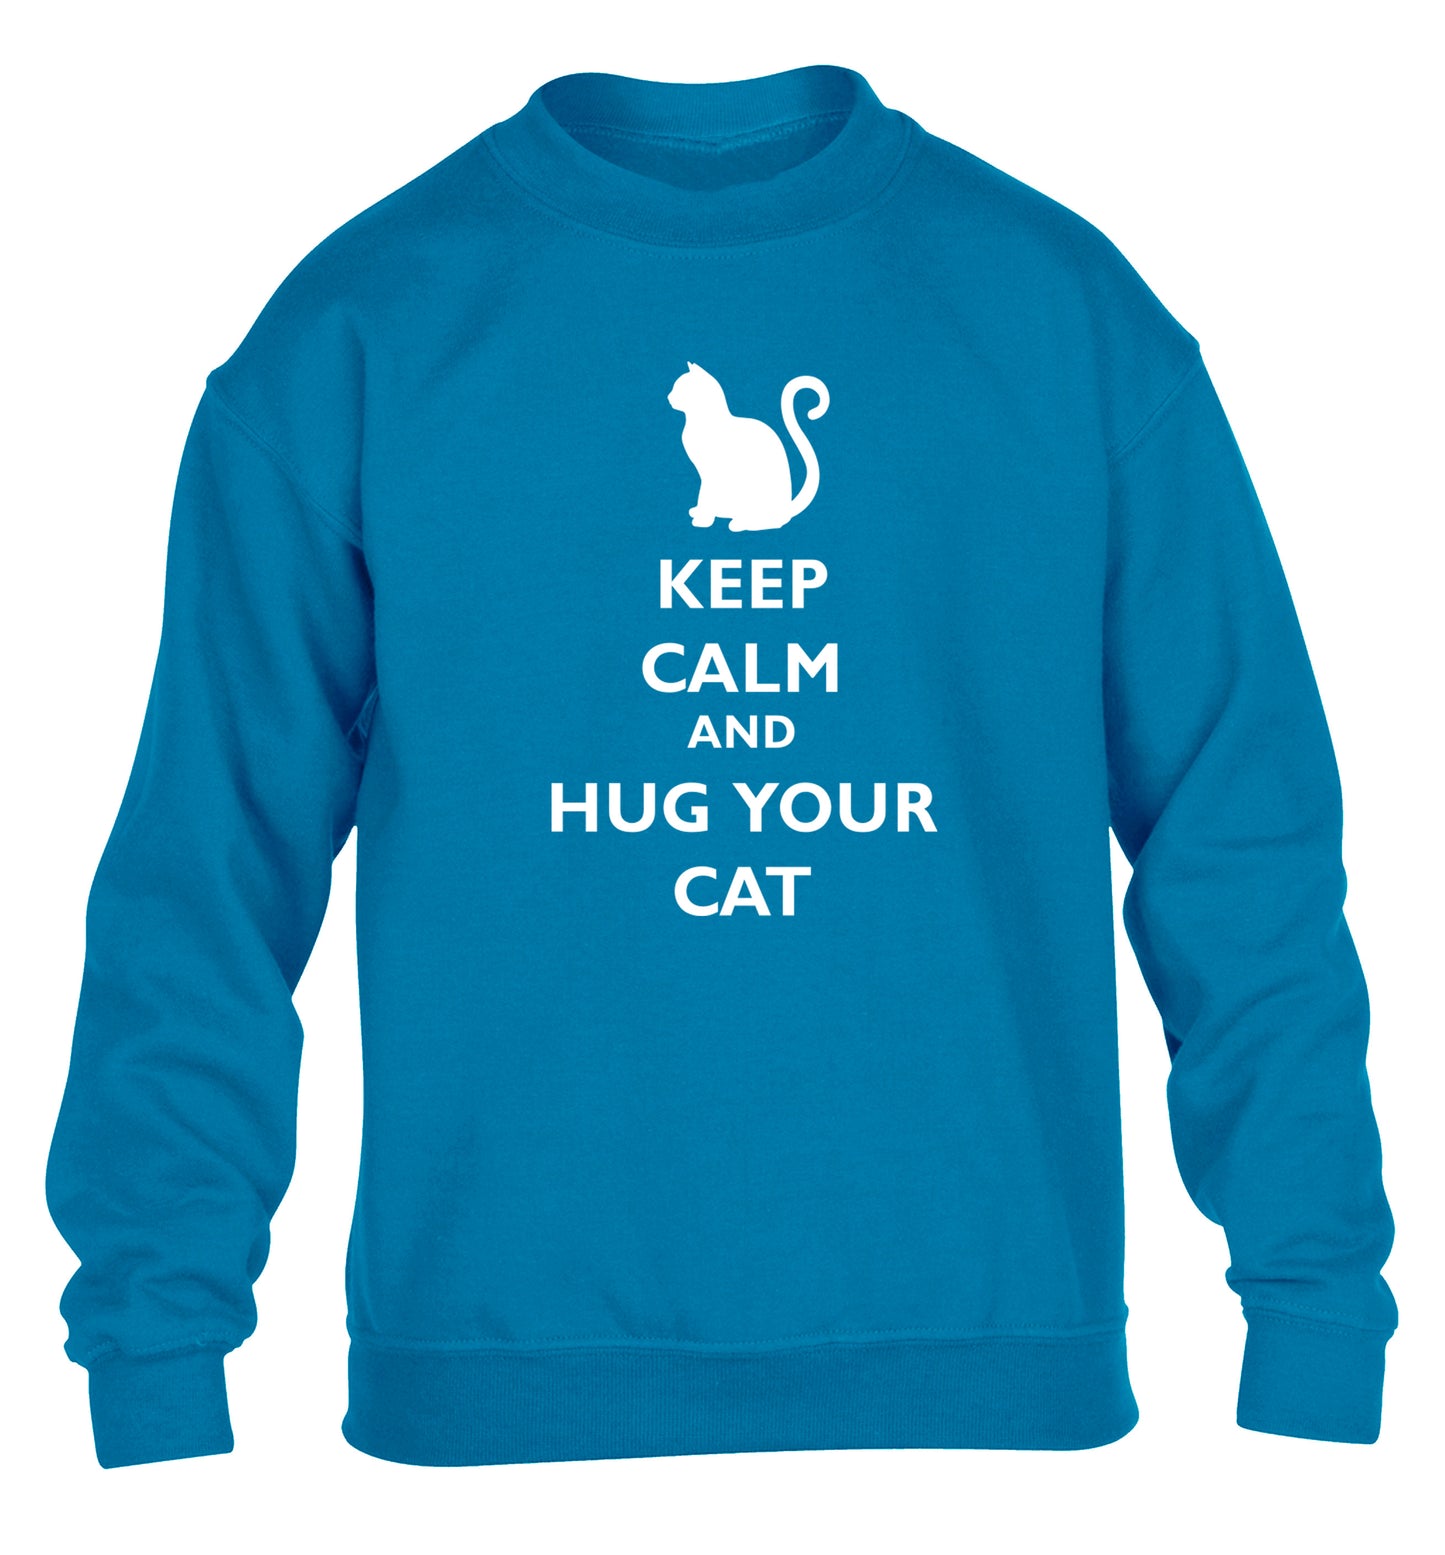 Keep calm and hug your cat children's blue sweater 12-13 Years